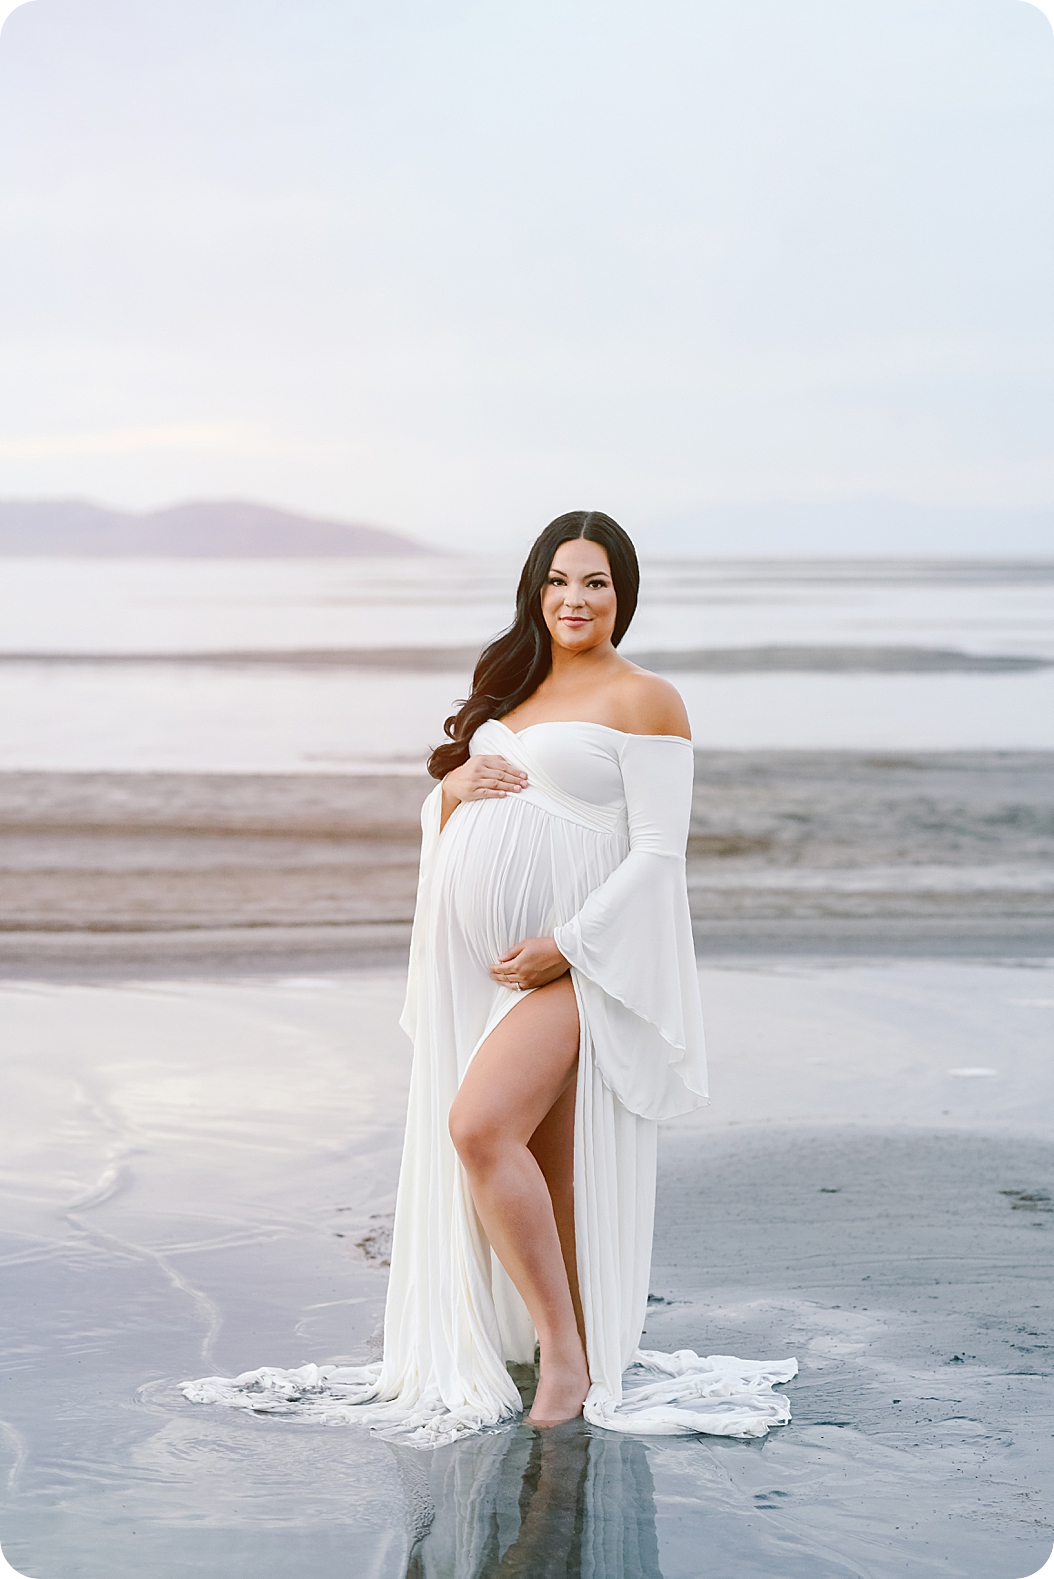 Lakeside Maternity Portraits for expectant mother